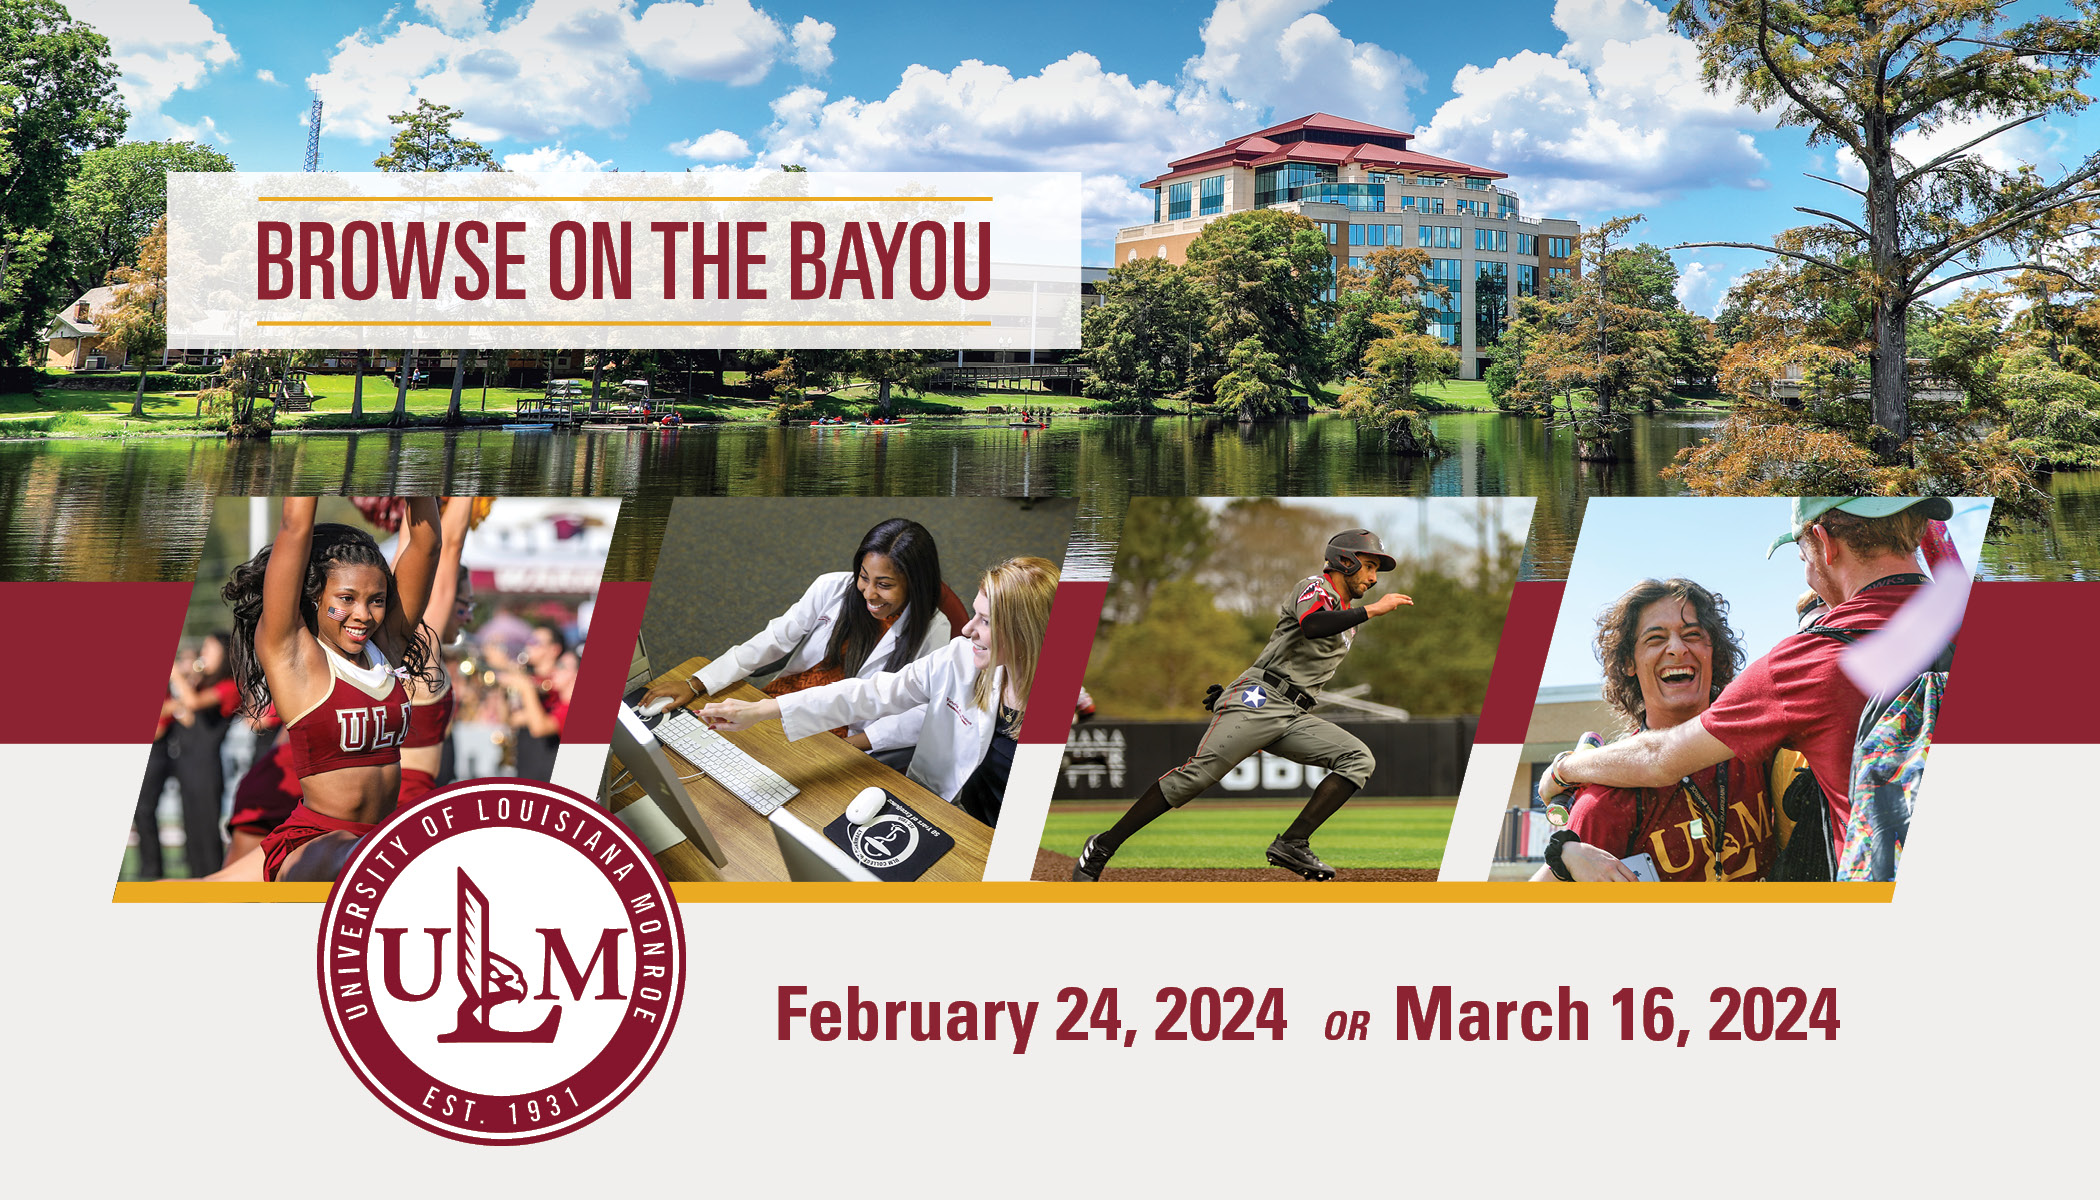 Four photos (a cheerleader, two students pointing at a computer, a baseball player, and two students smiling and embracing) layover an image of a tall building overlooking a bayou. People are kayaking on the bayou. Ƶ's logo is in the corner. Text reads, "February 24, 2024 or March 16, 2024"